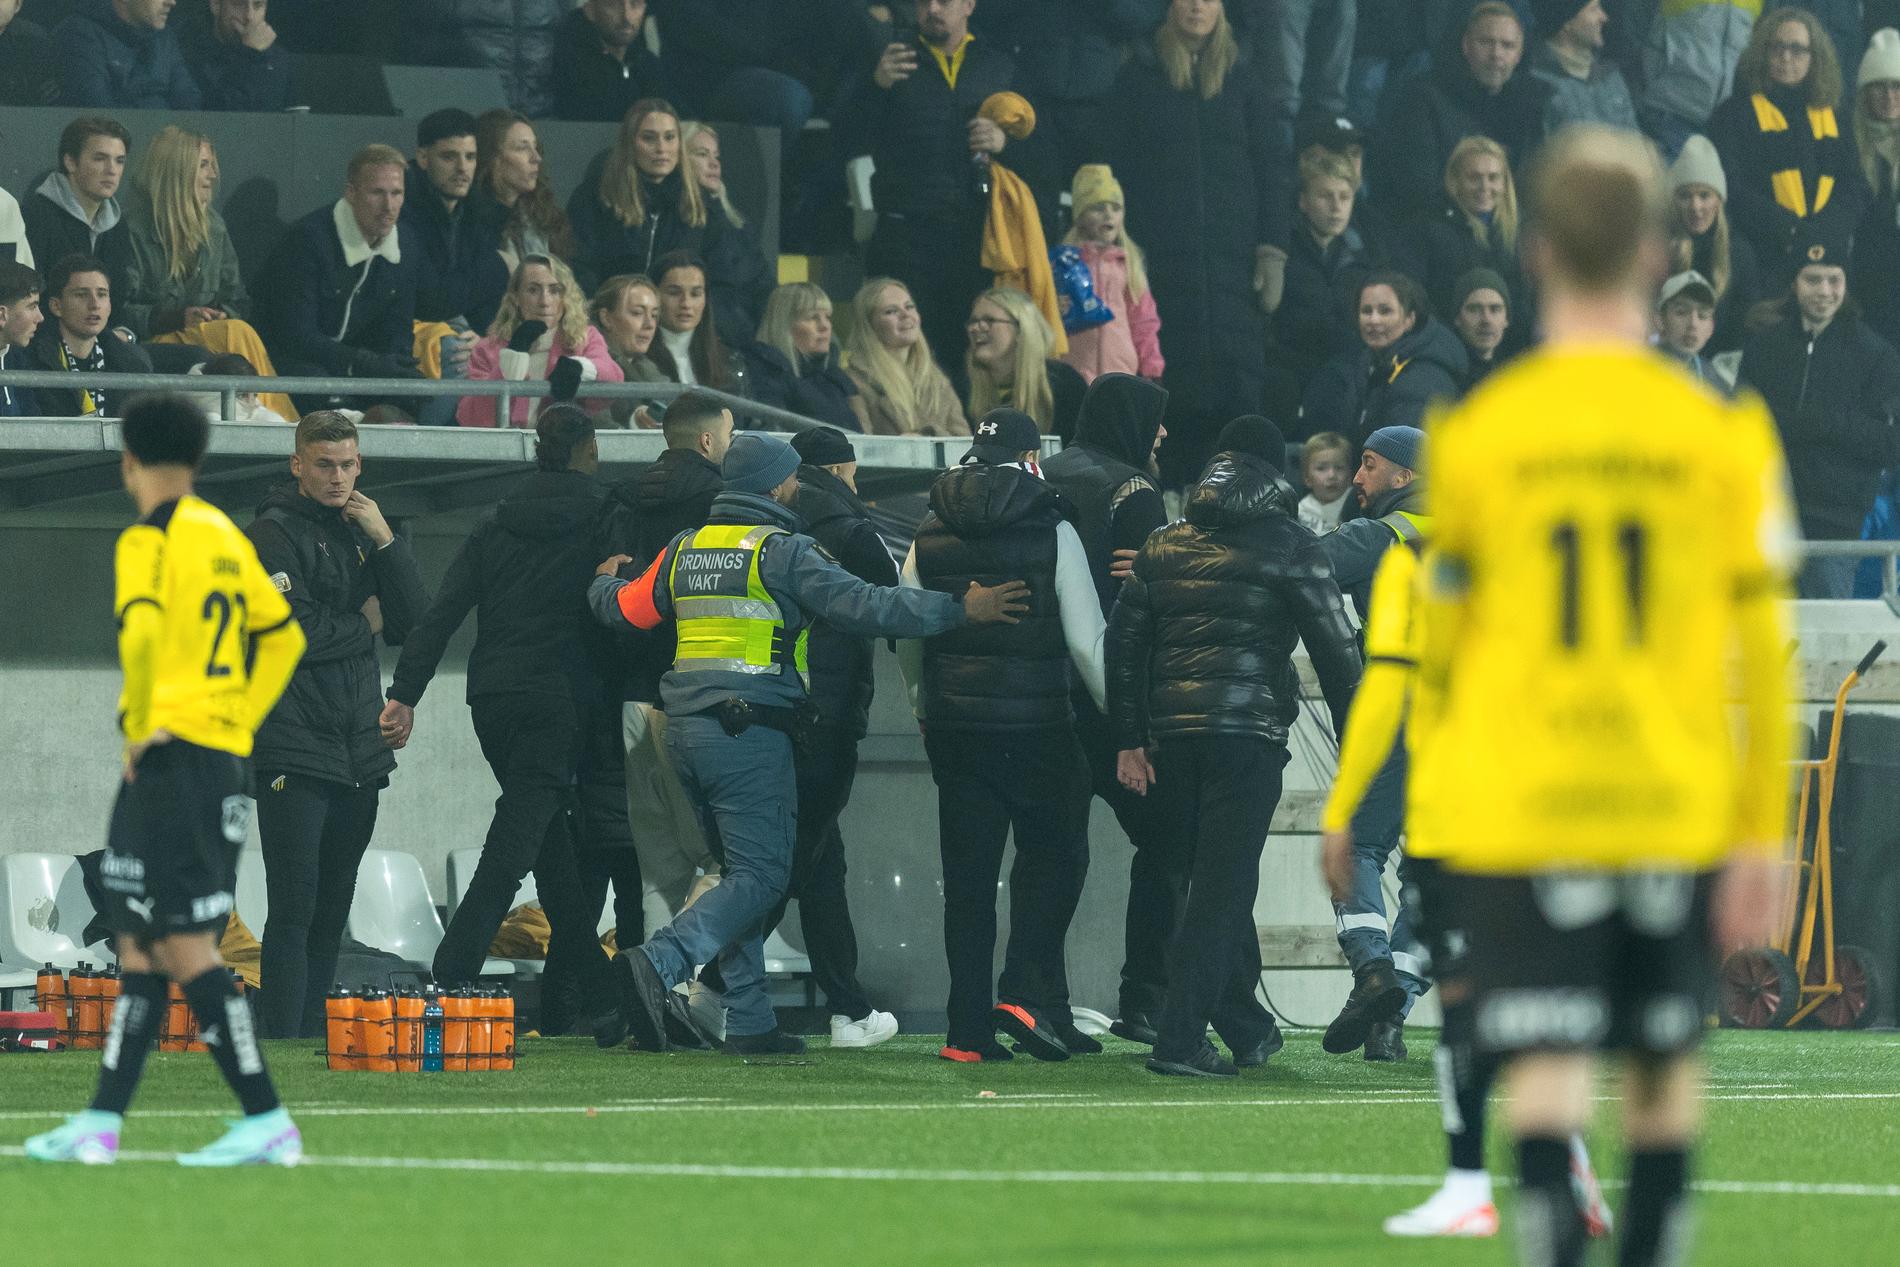 Sweden’s top-flight match was halted after a storm on the pitch